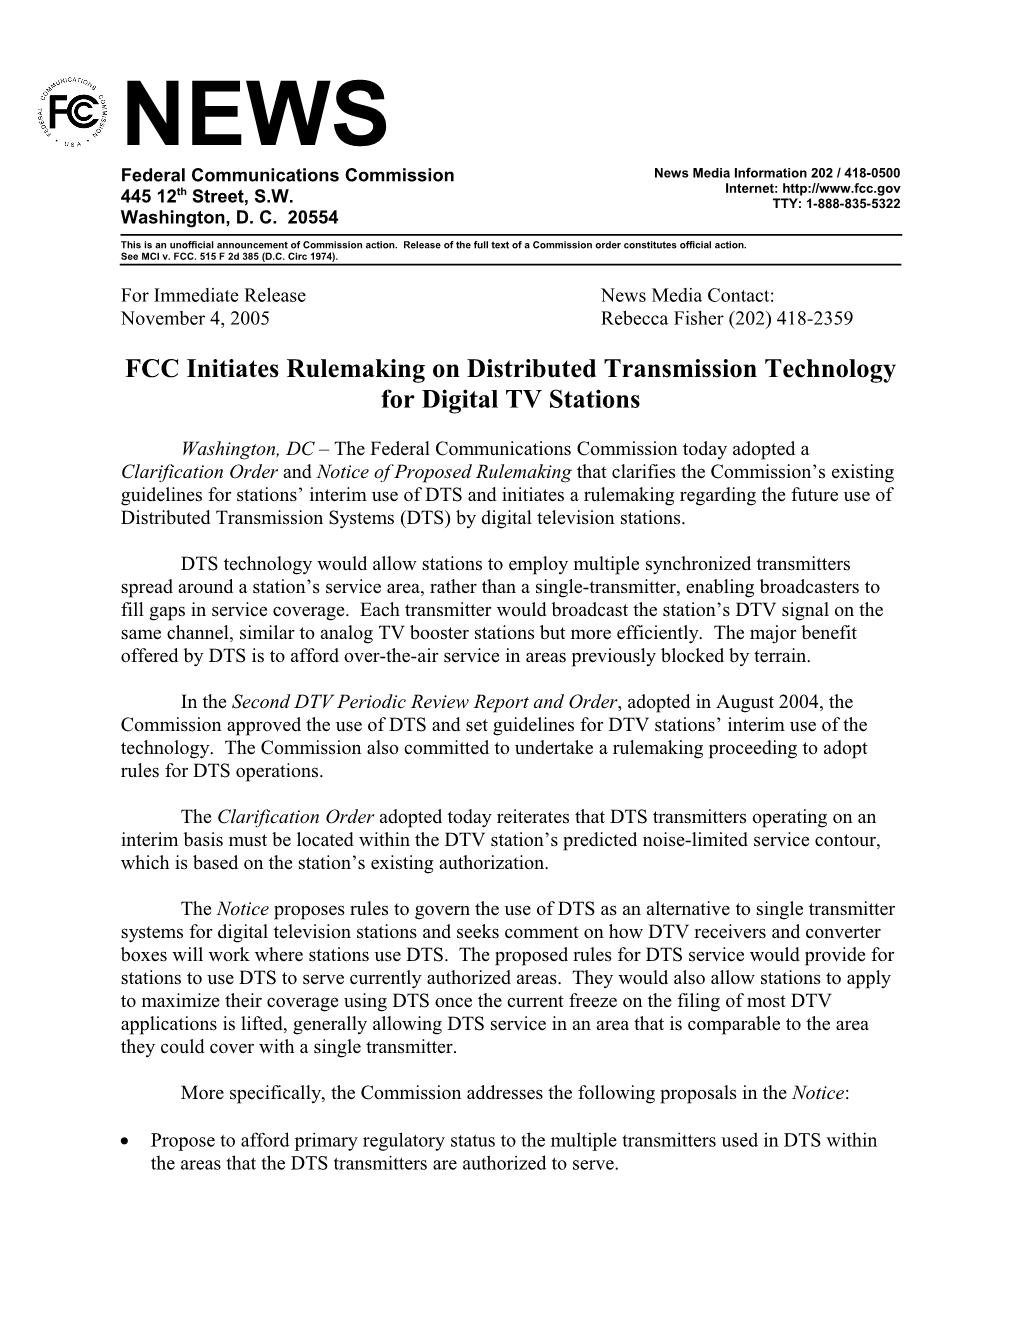 FCC Initiates Rulemaking on Distributed Transmission Technology for Digital TV Stations